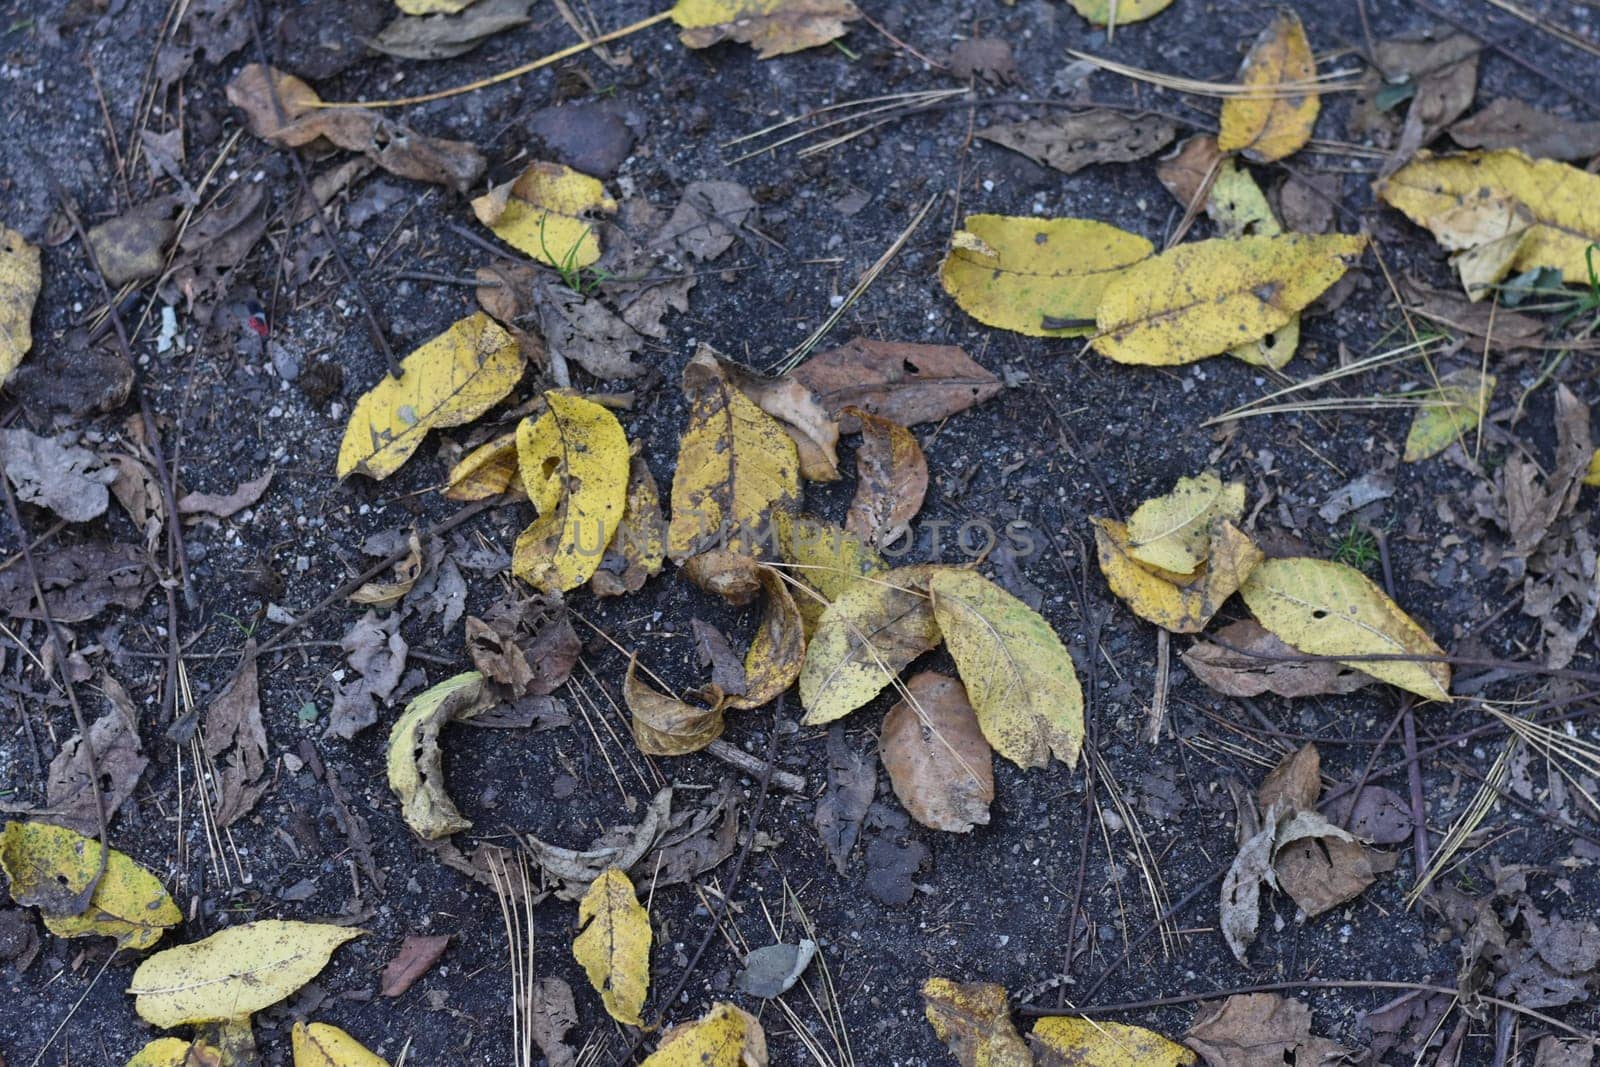 Yellow and Brown Leaves Fallen on Black Asphalt Road Background. Walking in Nature at Orchard Beach Park, Bronx, New York City. High quality photo